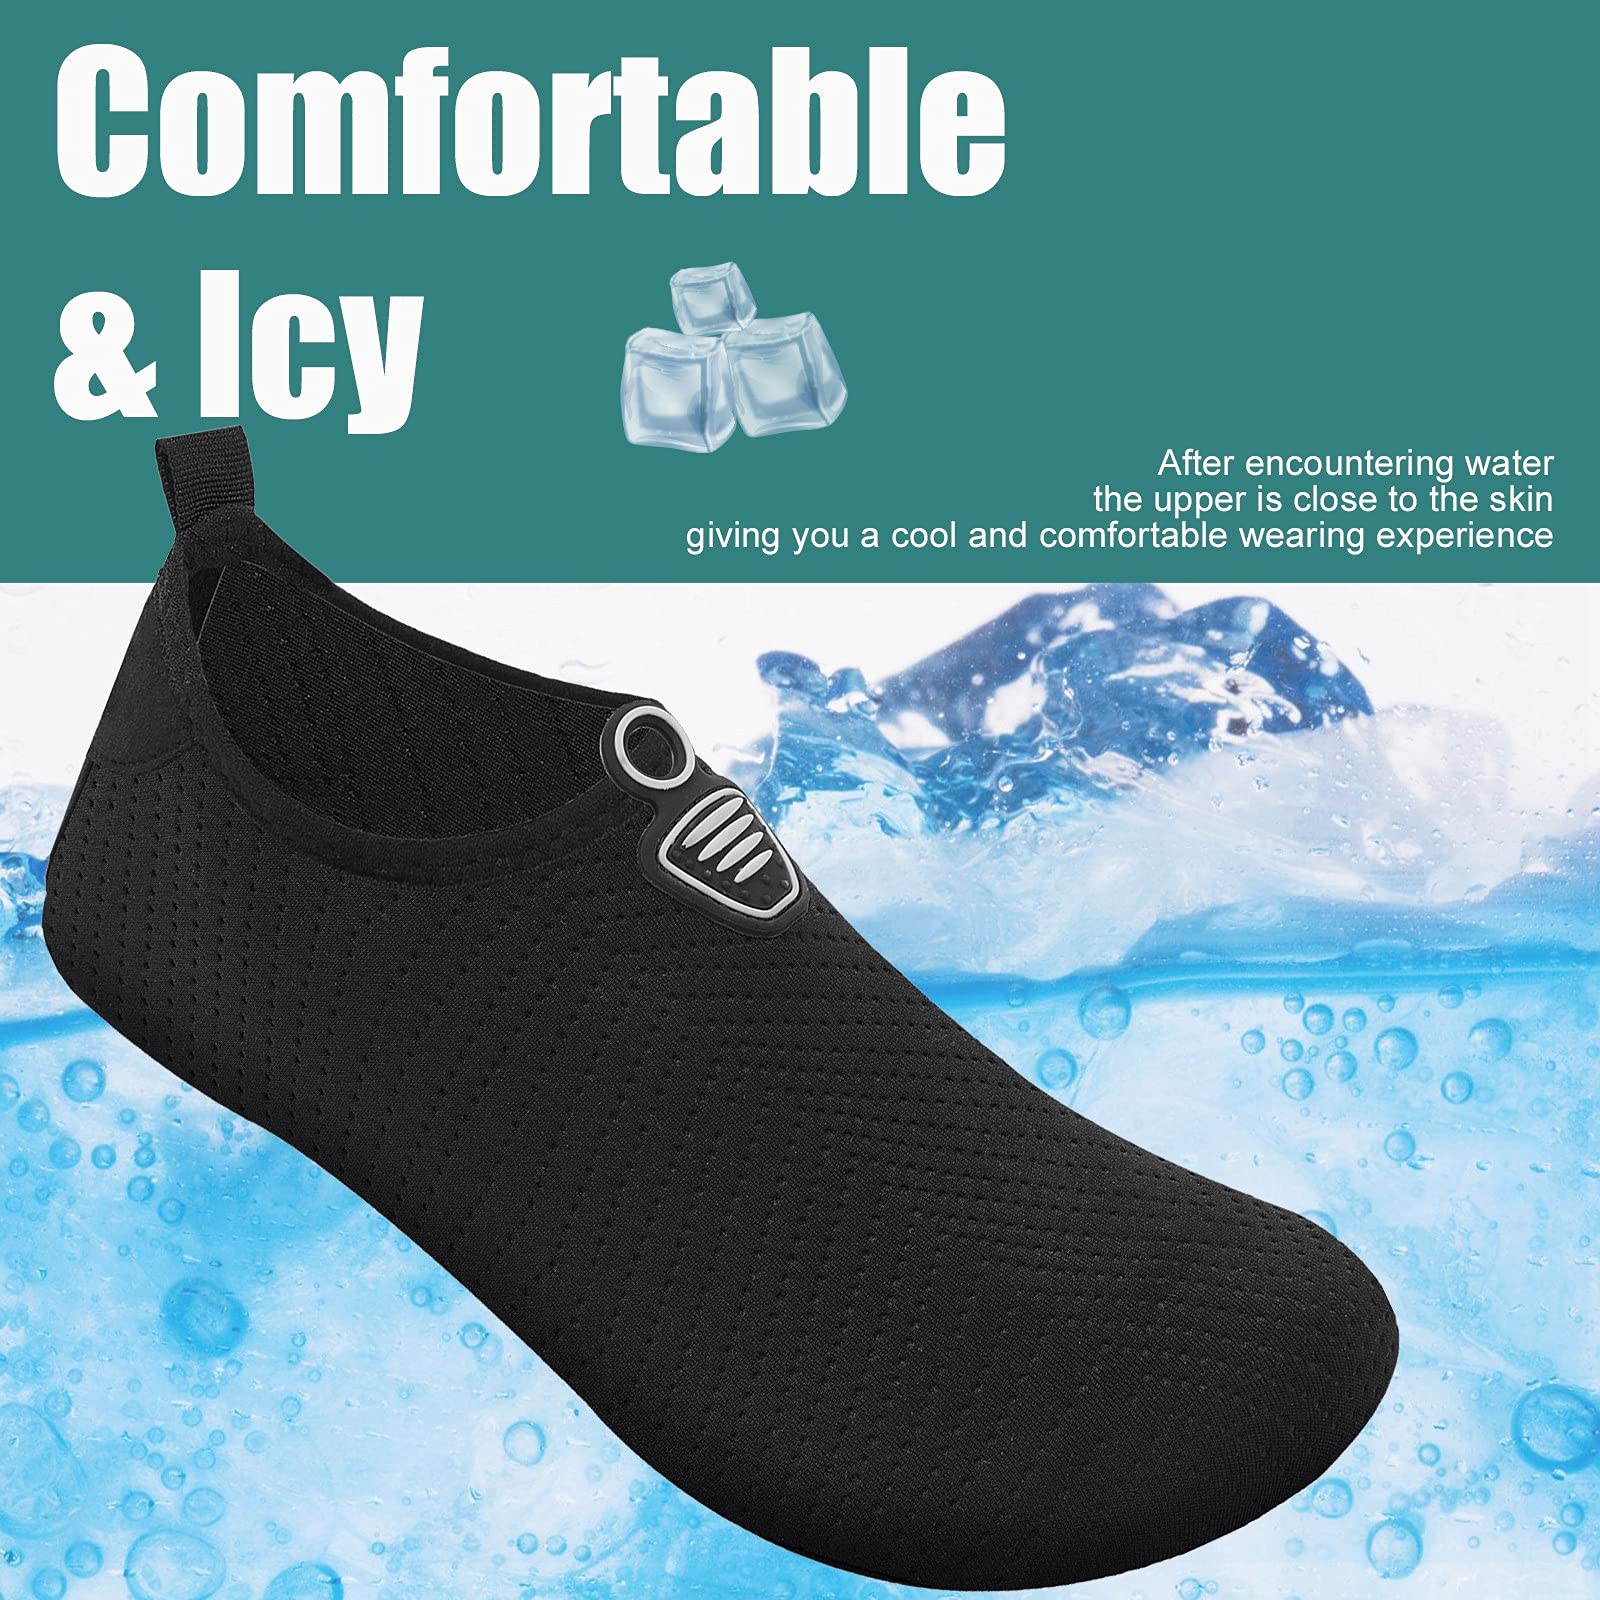 Unisex Water Shoes Quick-Drying Beach Aqua Shoes for Women Men Black Embossed 7.5-8.5 W/ 6.5-7.5 M US